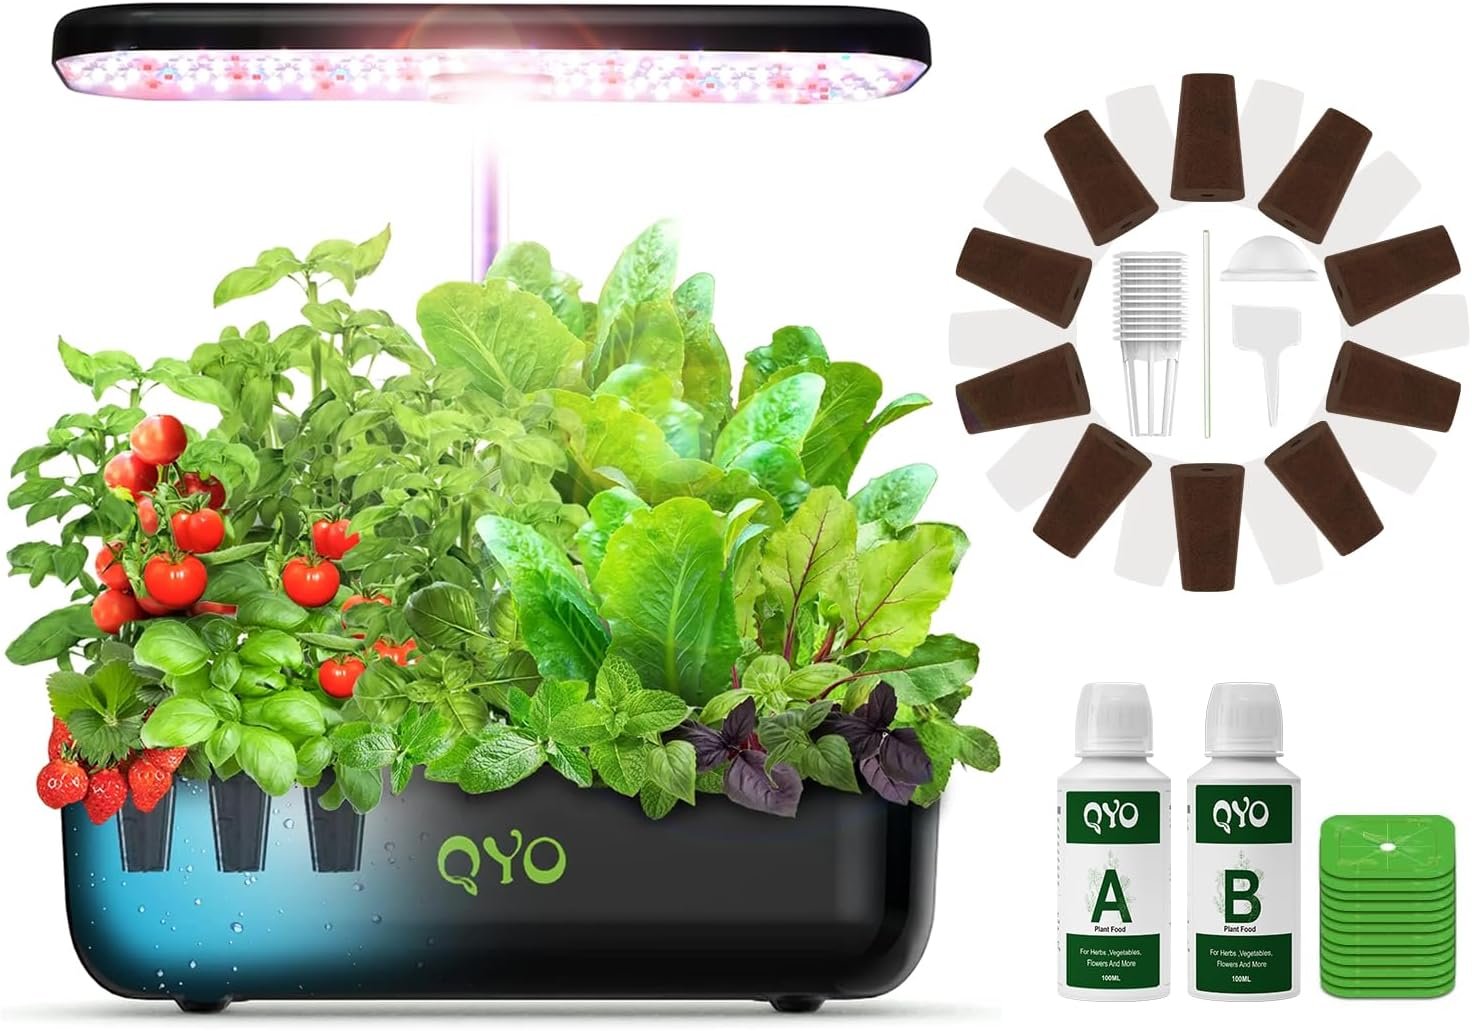 QYO Hydroponics Growing System, 12 Pods Indoor Herb Garden with 36W Full-Spectrum Grow Light, Pump System, Automatic Timer, 23.8 Height Adjustable, Plants Germination Kit for Home Kitchen Gardening